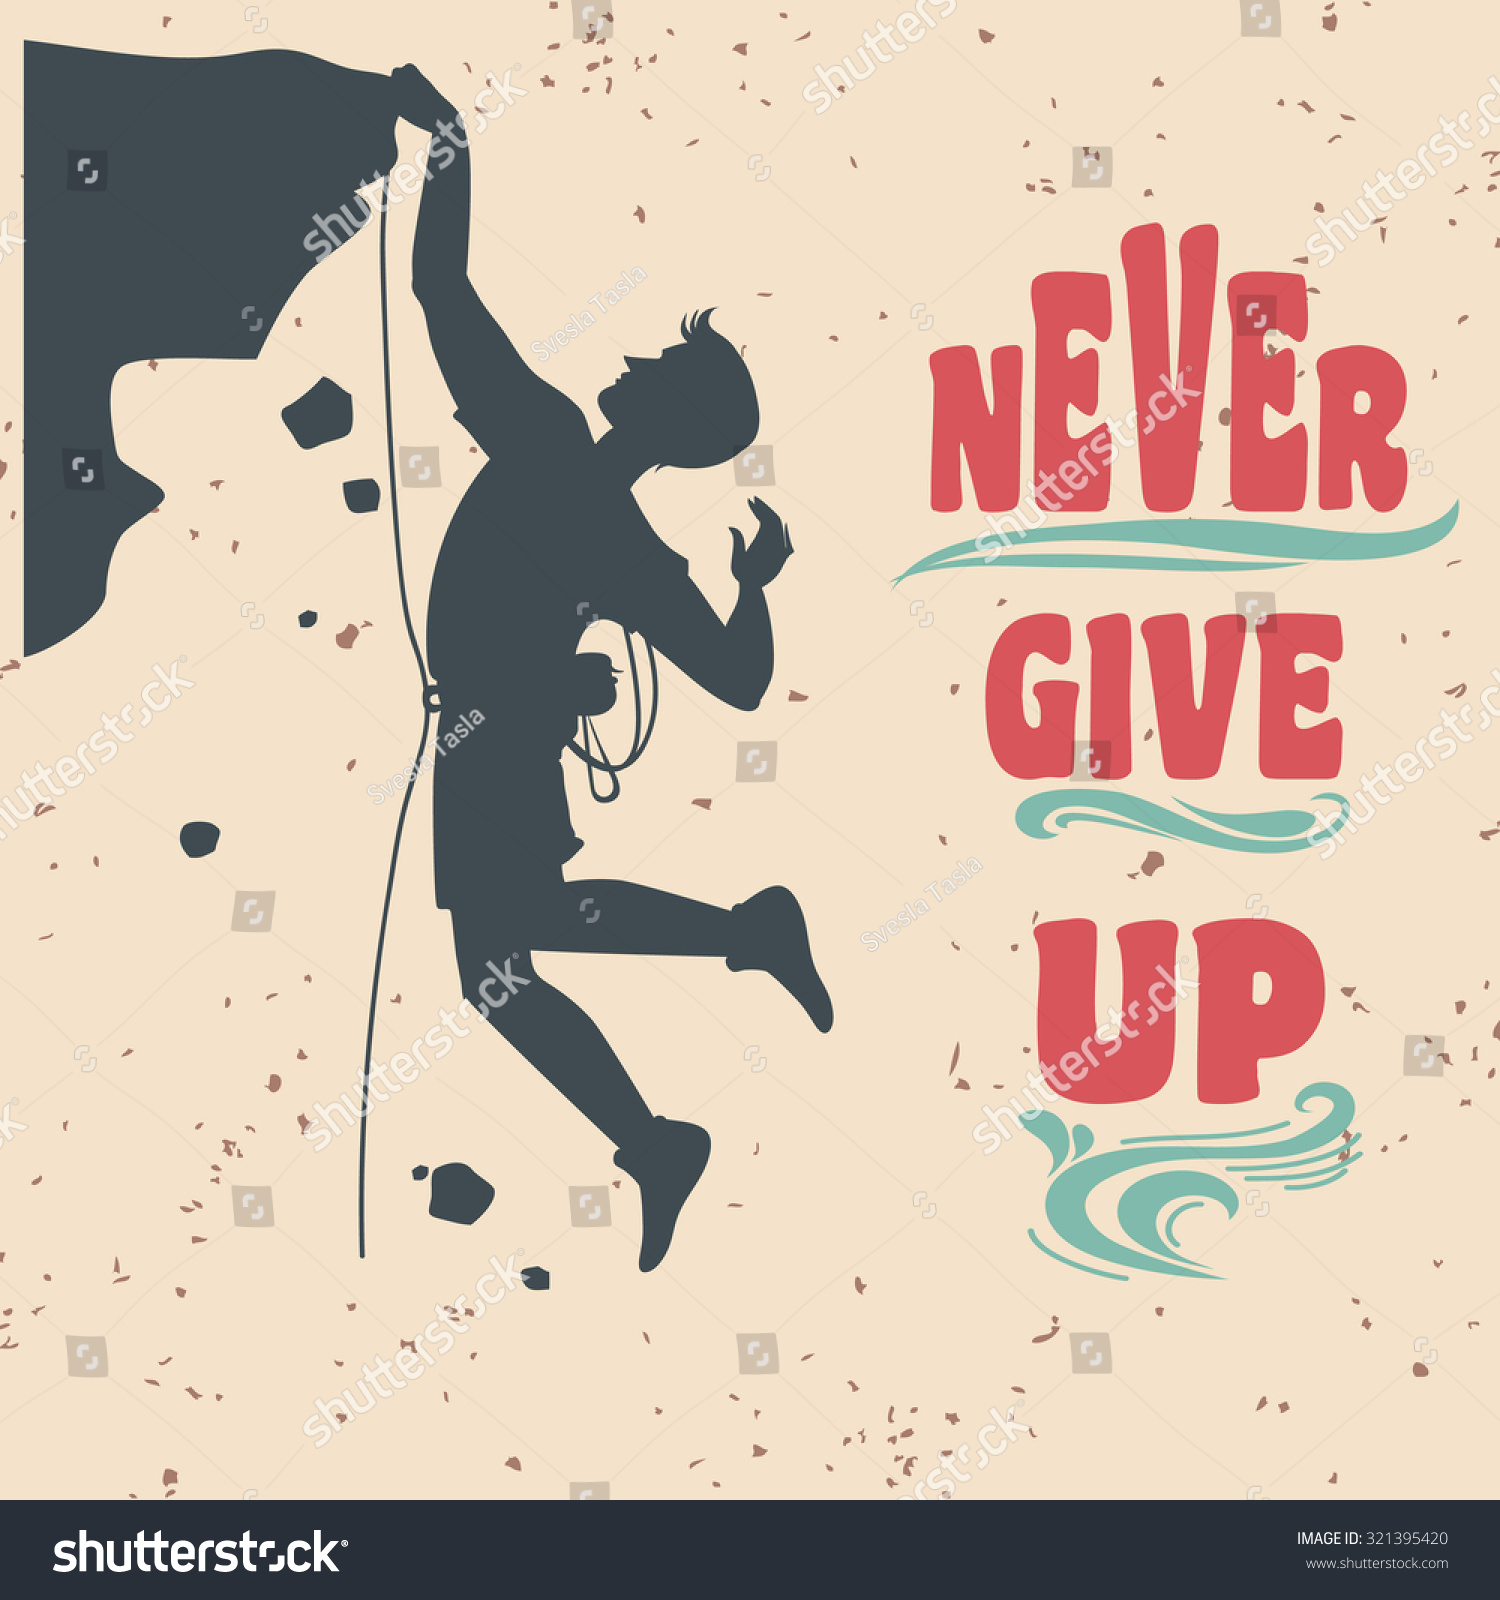 Never give up вектор